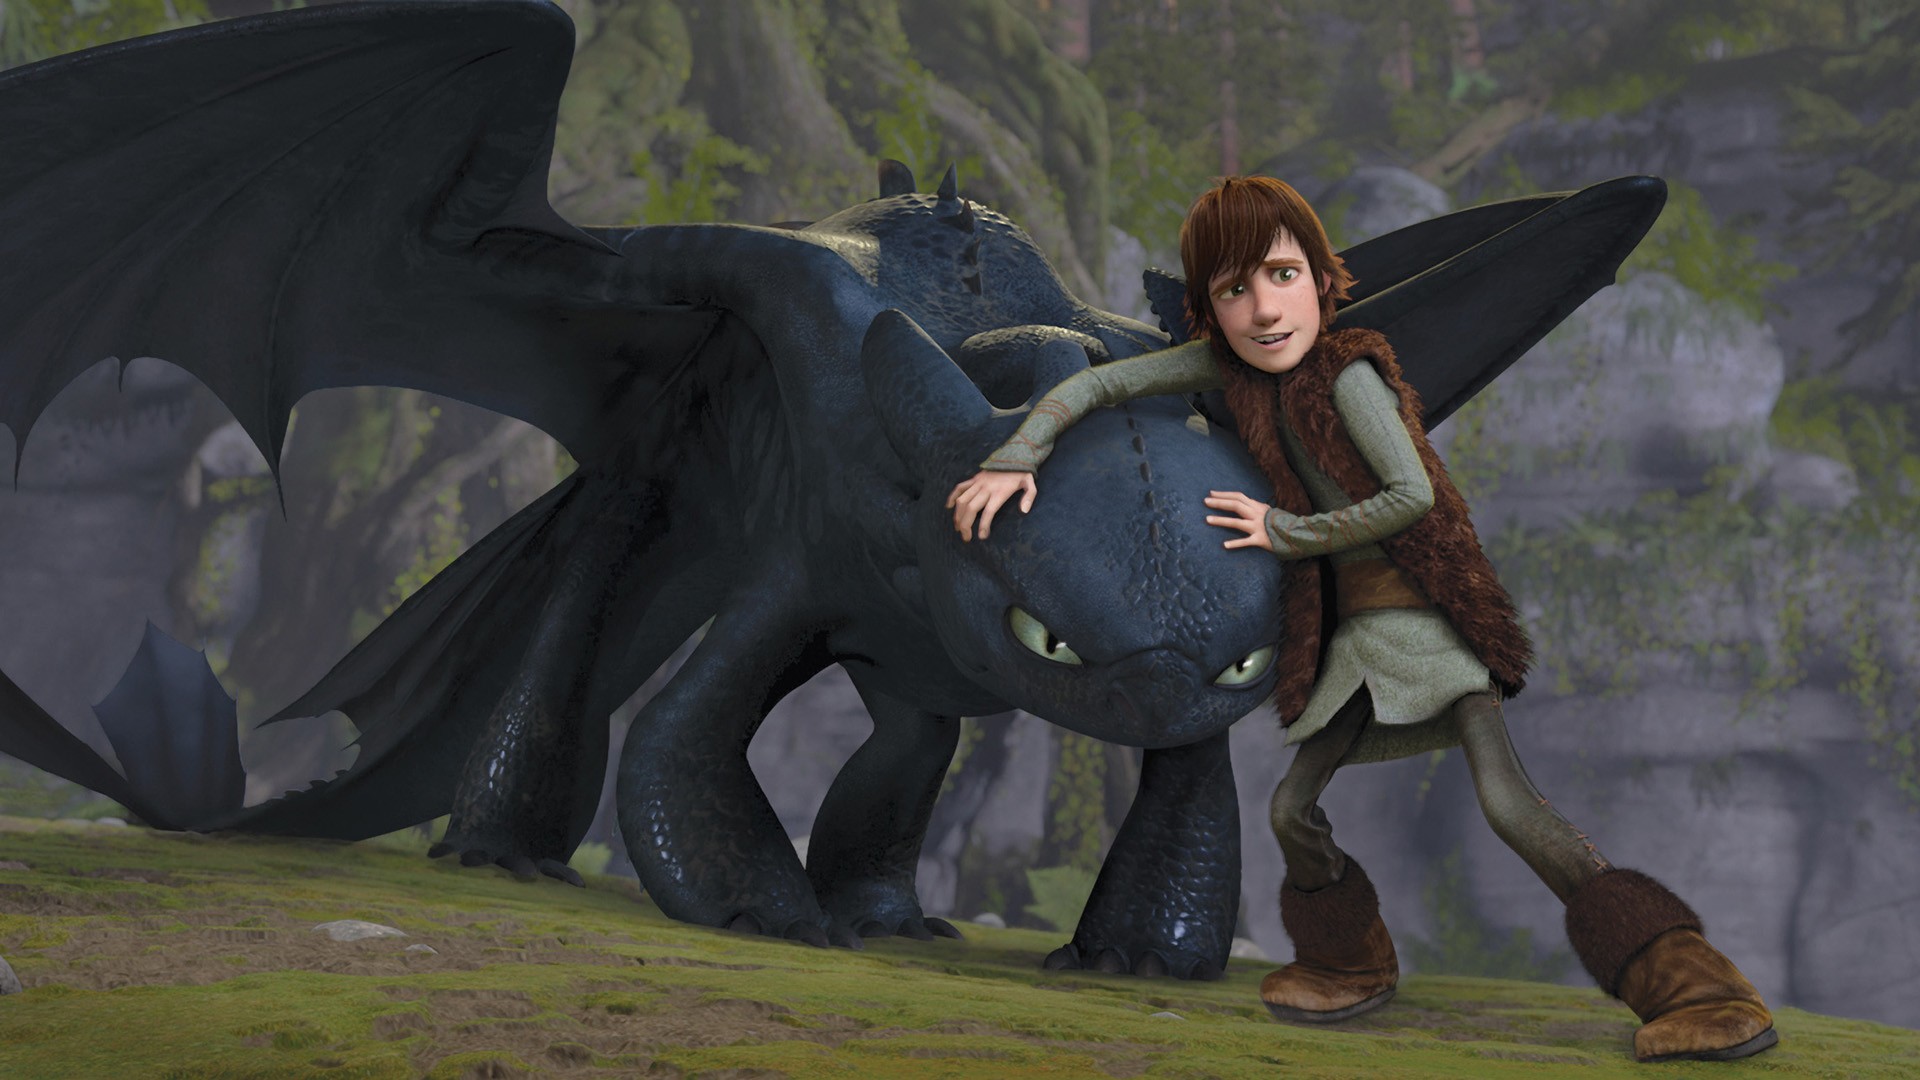 General 1920x1080 How to Train Your Dragon Dreamworks movies animated movies